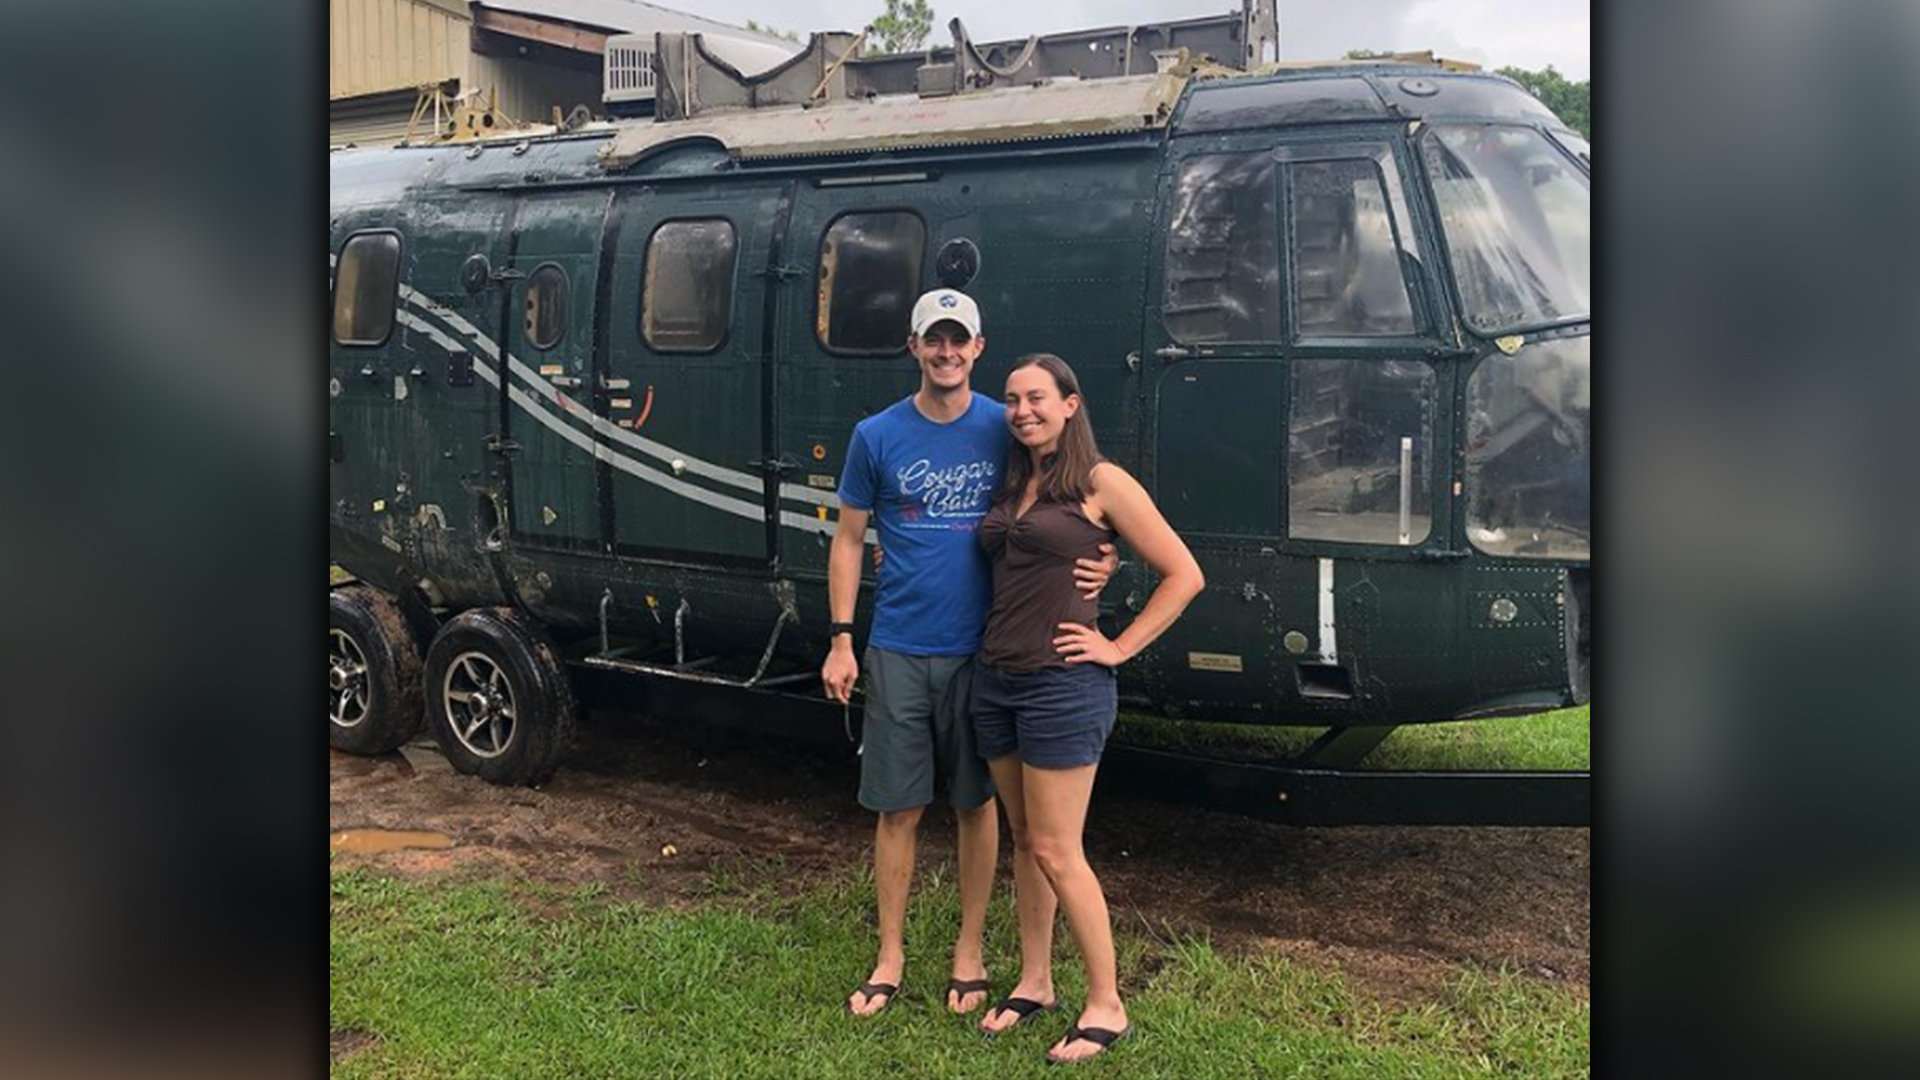 A helicopter flown in Afghanistan is now a military couple’s camper